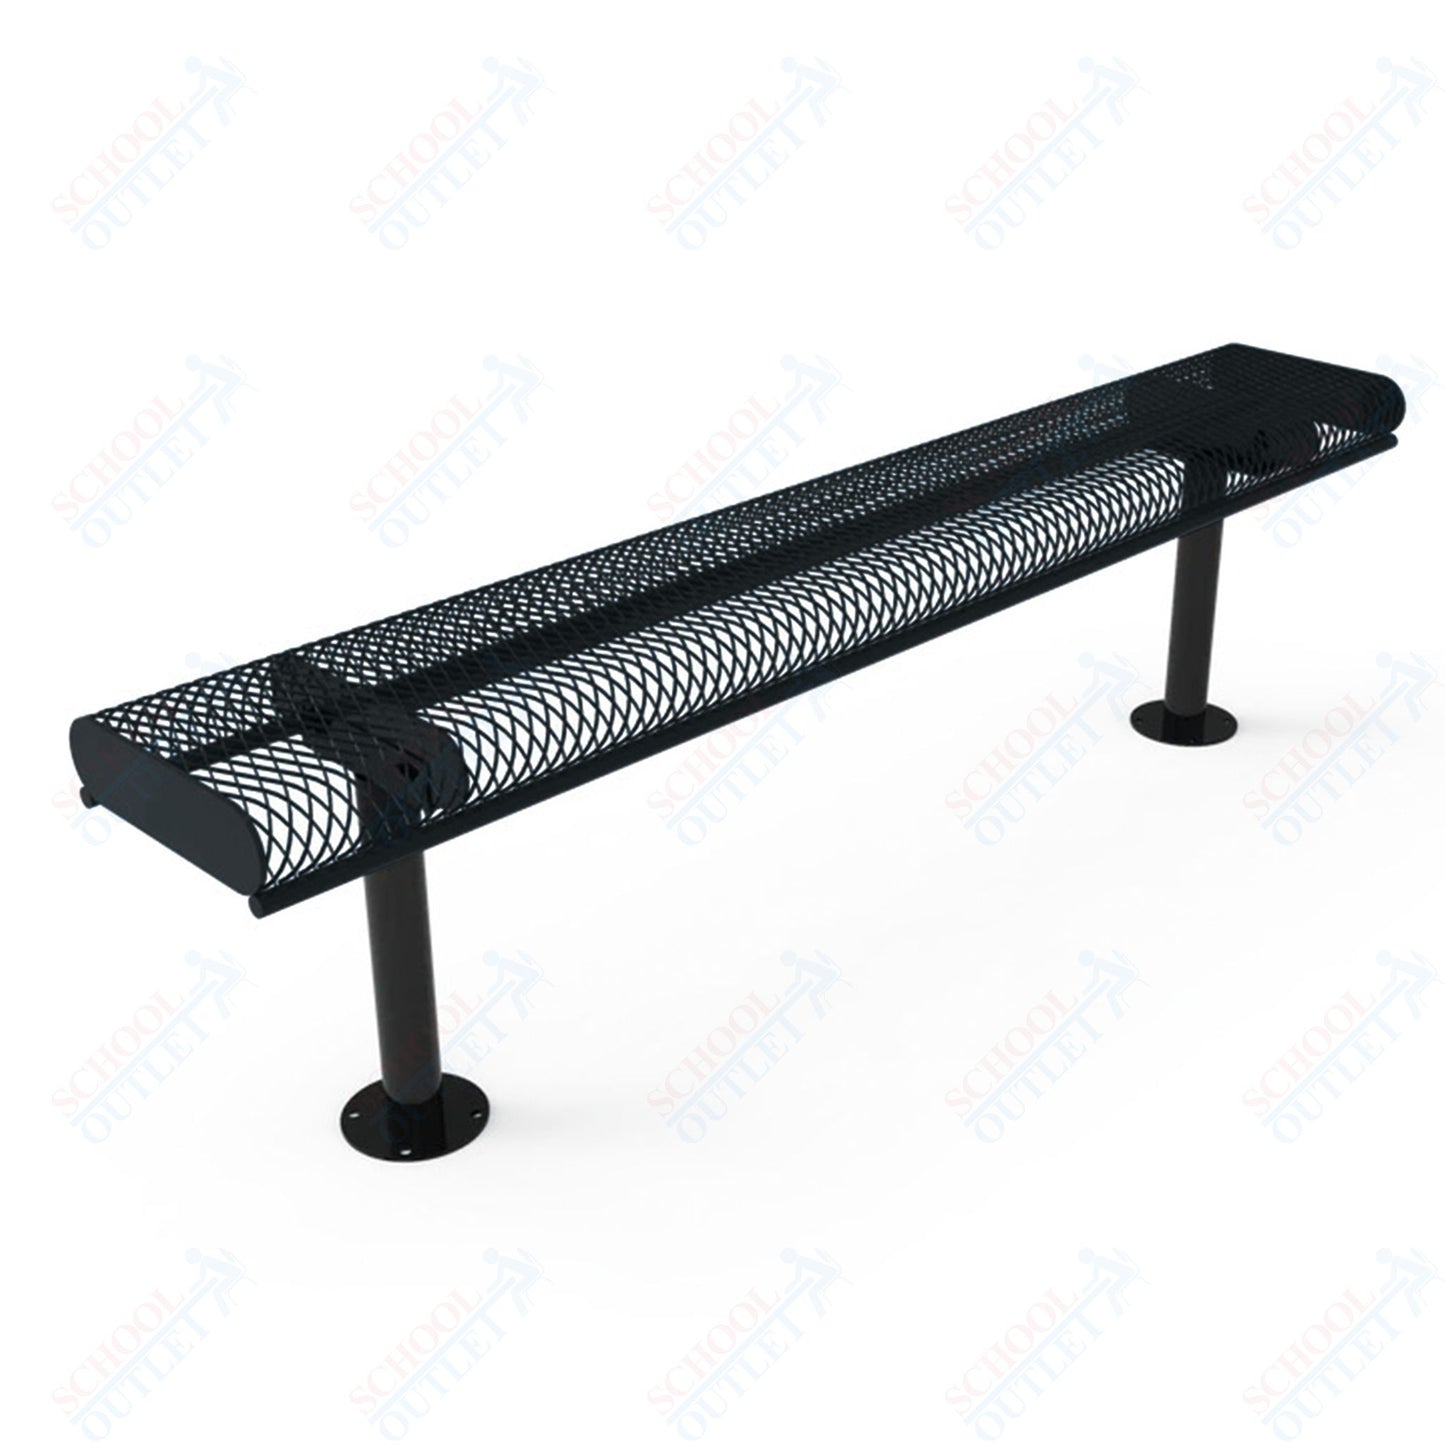 MyTcoat - Rolled Edges Outdoor Bench without Back 6' L - Surface Mount (MYT-BRE06-23)